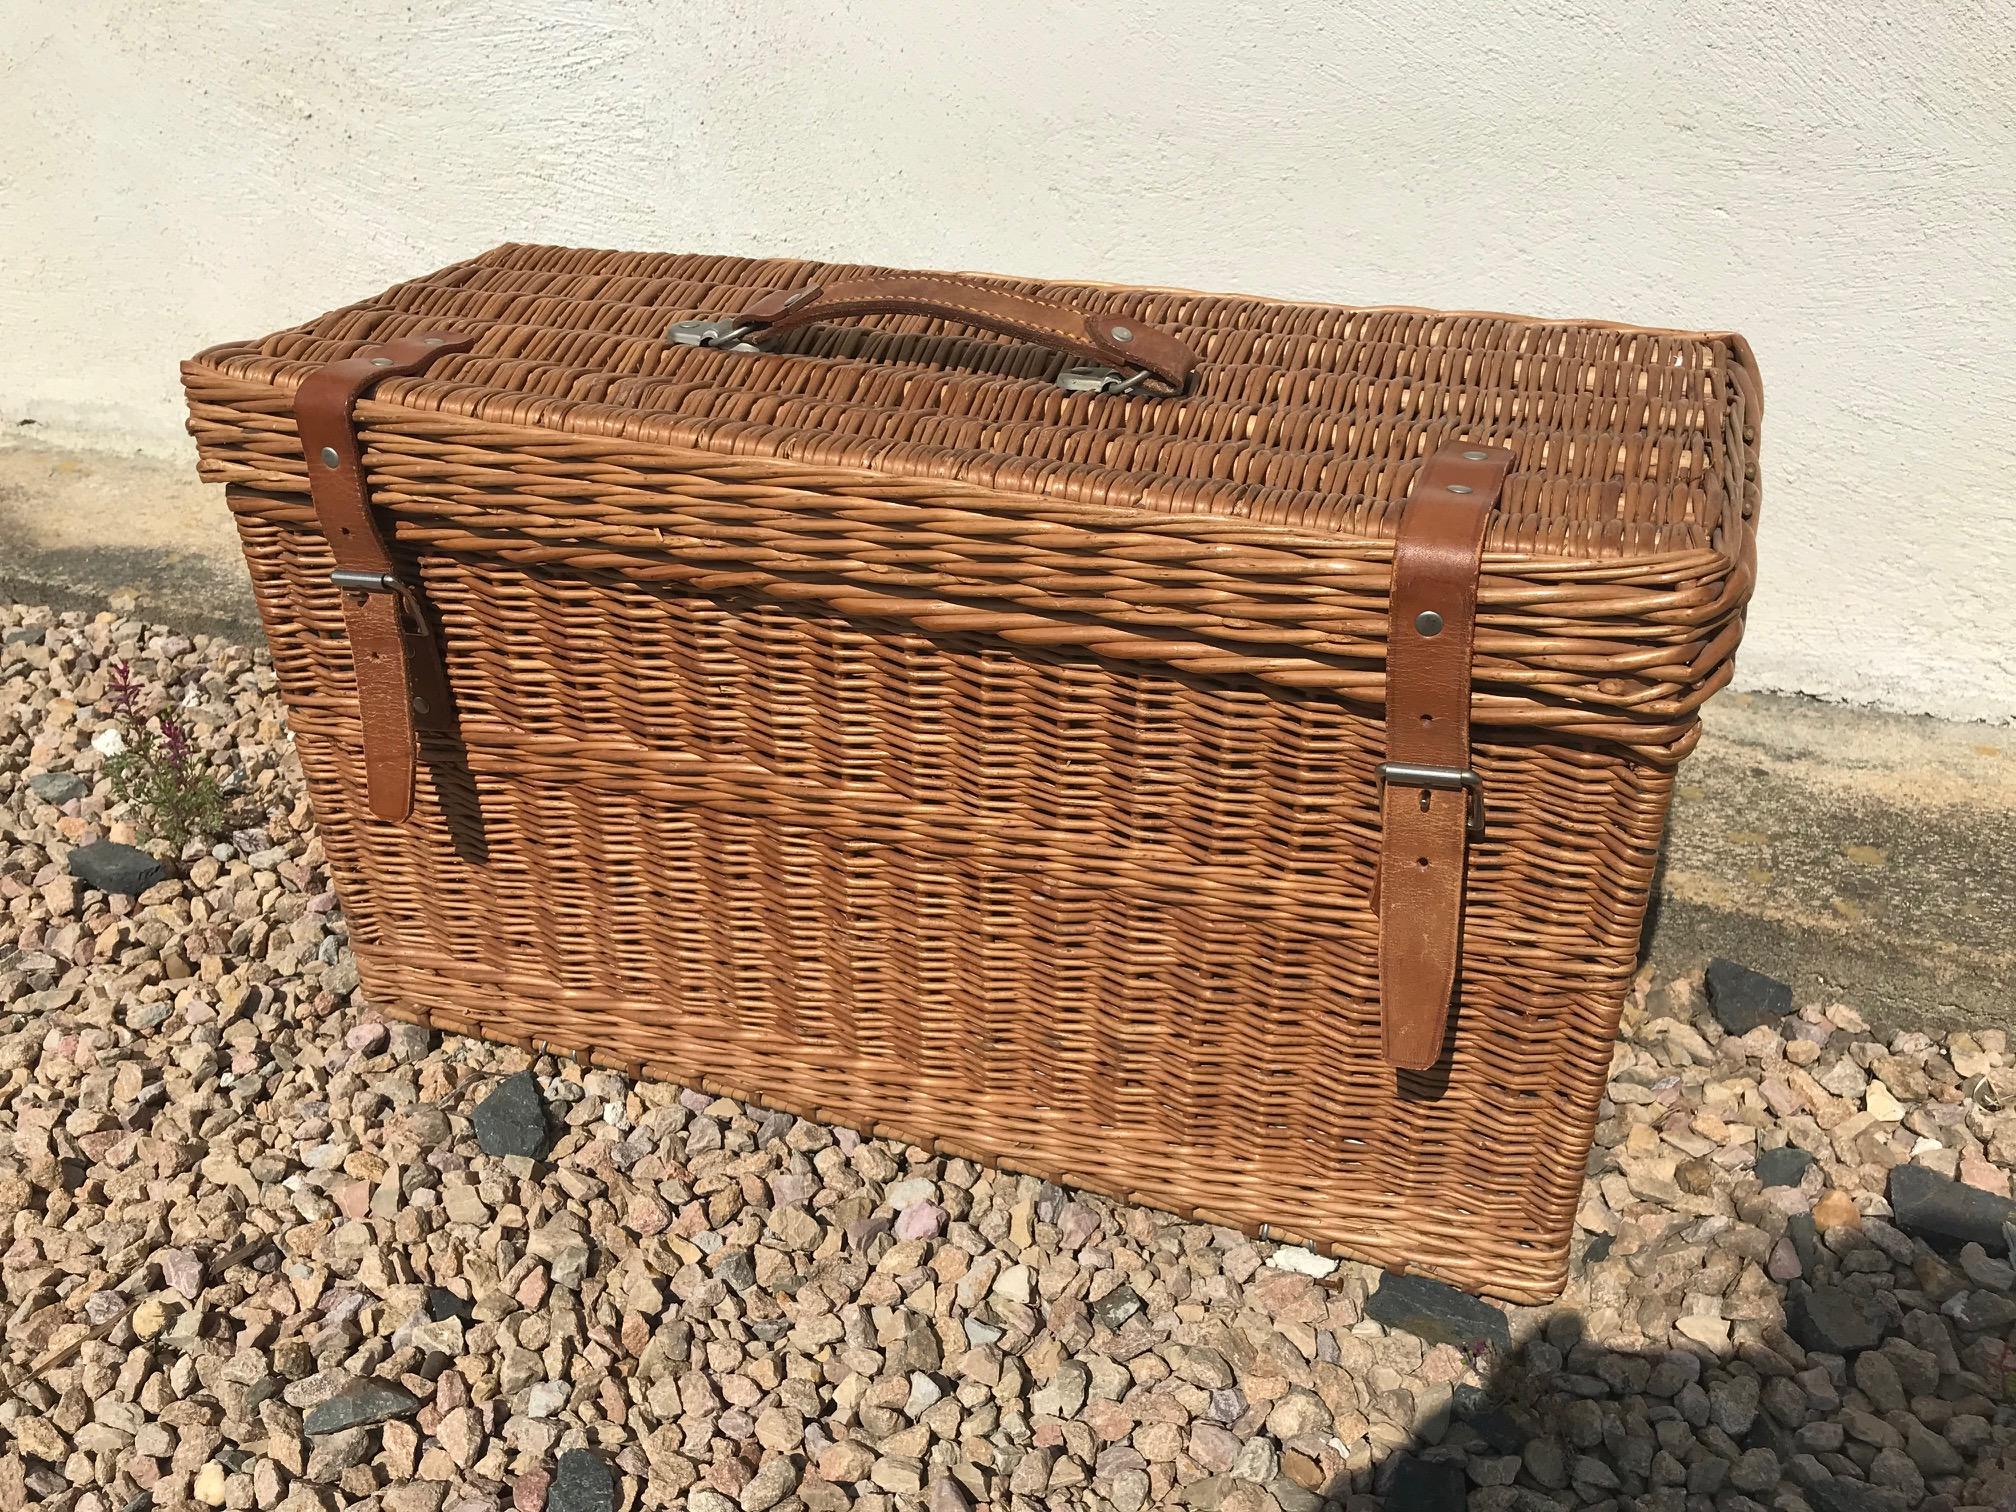 Nice and rare 20th century English wicker picnic basket for four people from the 1950s.
Made by Coracle. Was sold at Harrod's in London.
Four spoons, forks and knives.
Plastic plates, mugs, glass, Tupperware, bottles and one glass carafe. Also